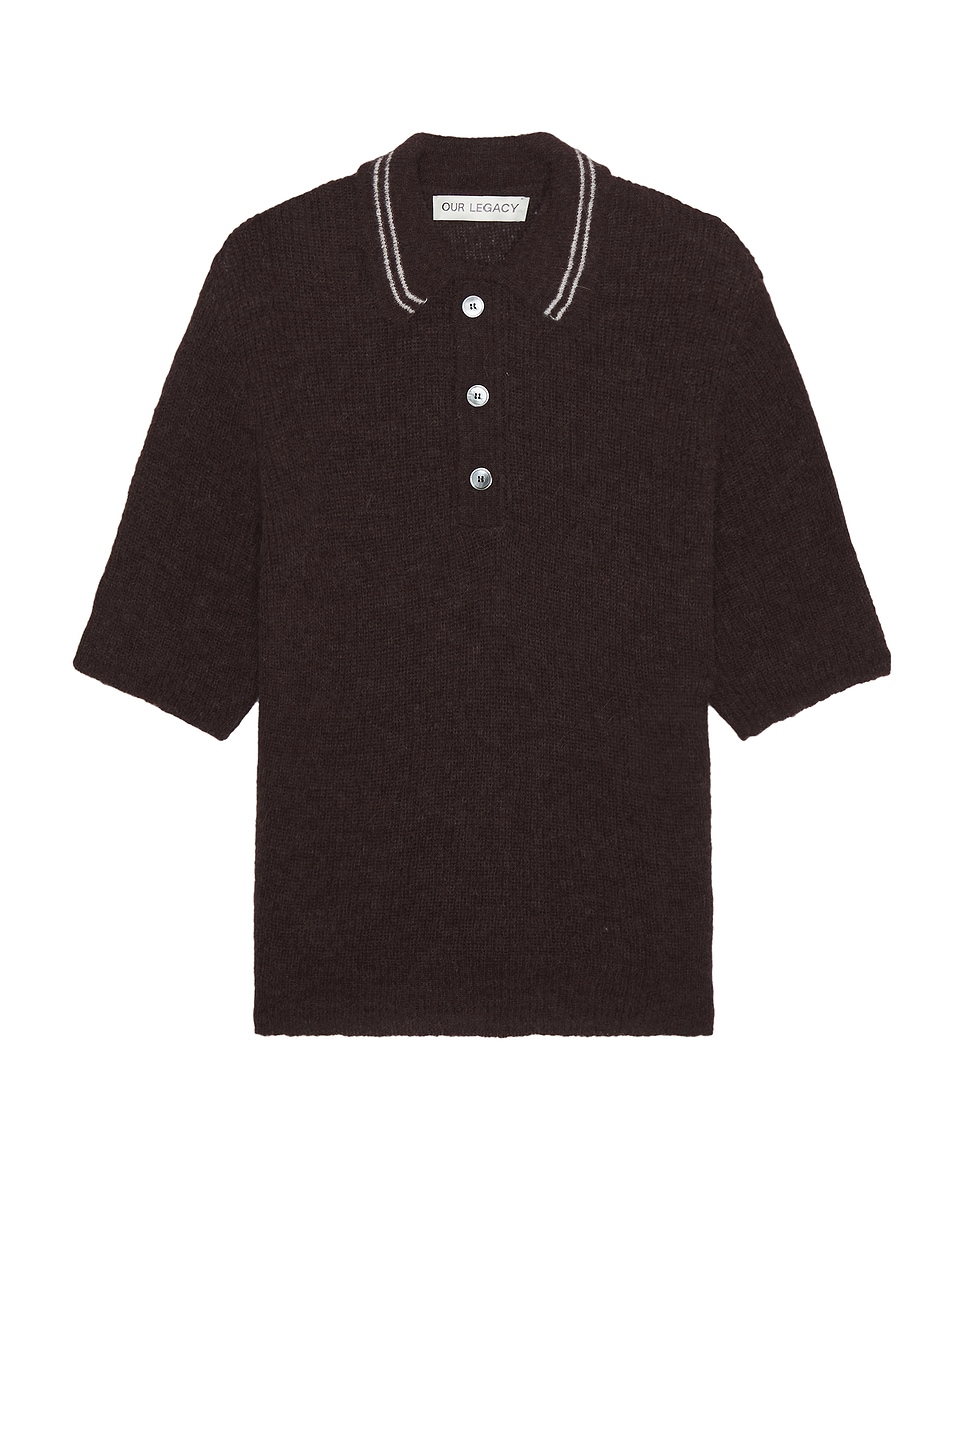 Image 1 of Our Legacy Traditional Polo in Euro Eggplant Fuzzy Alpaca